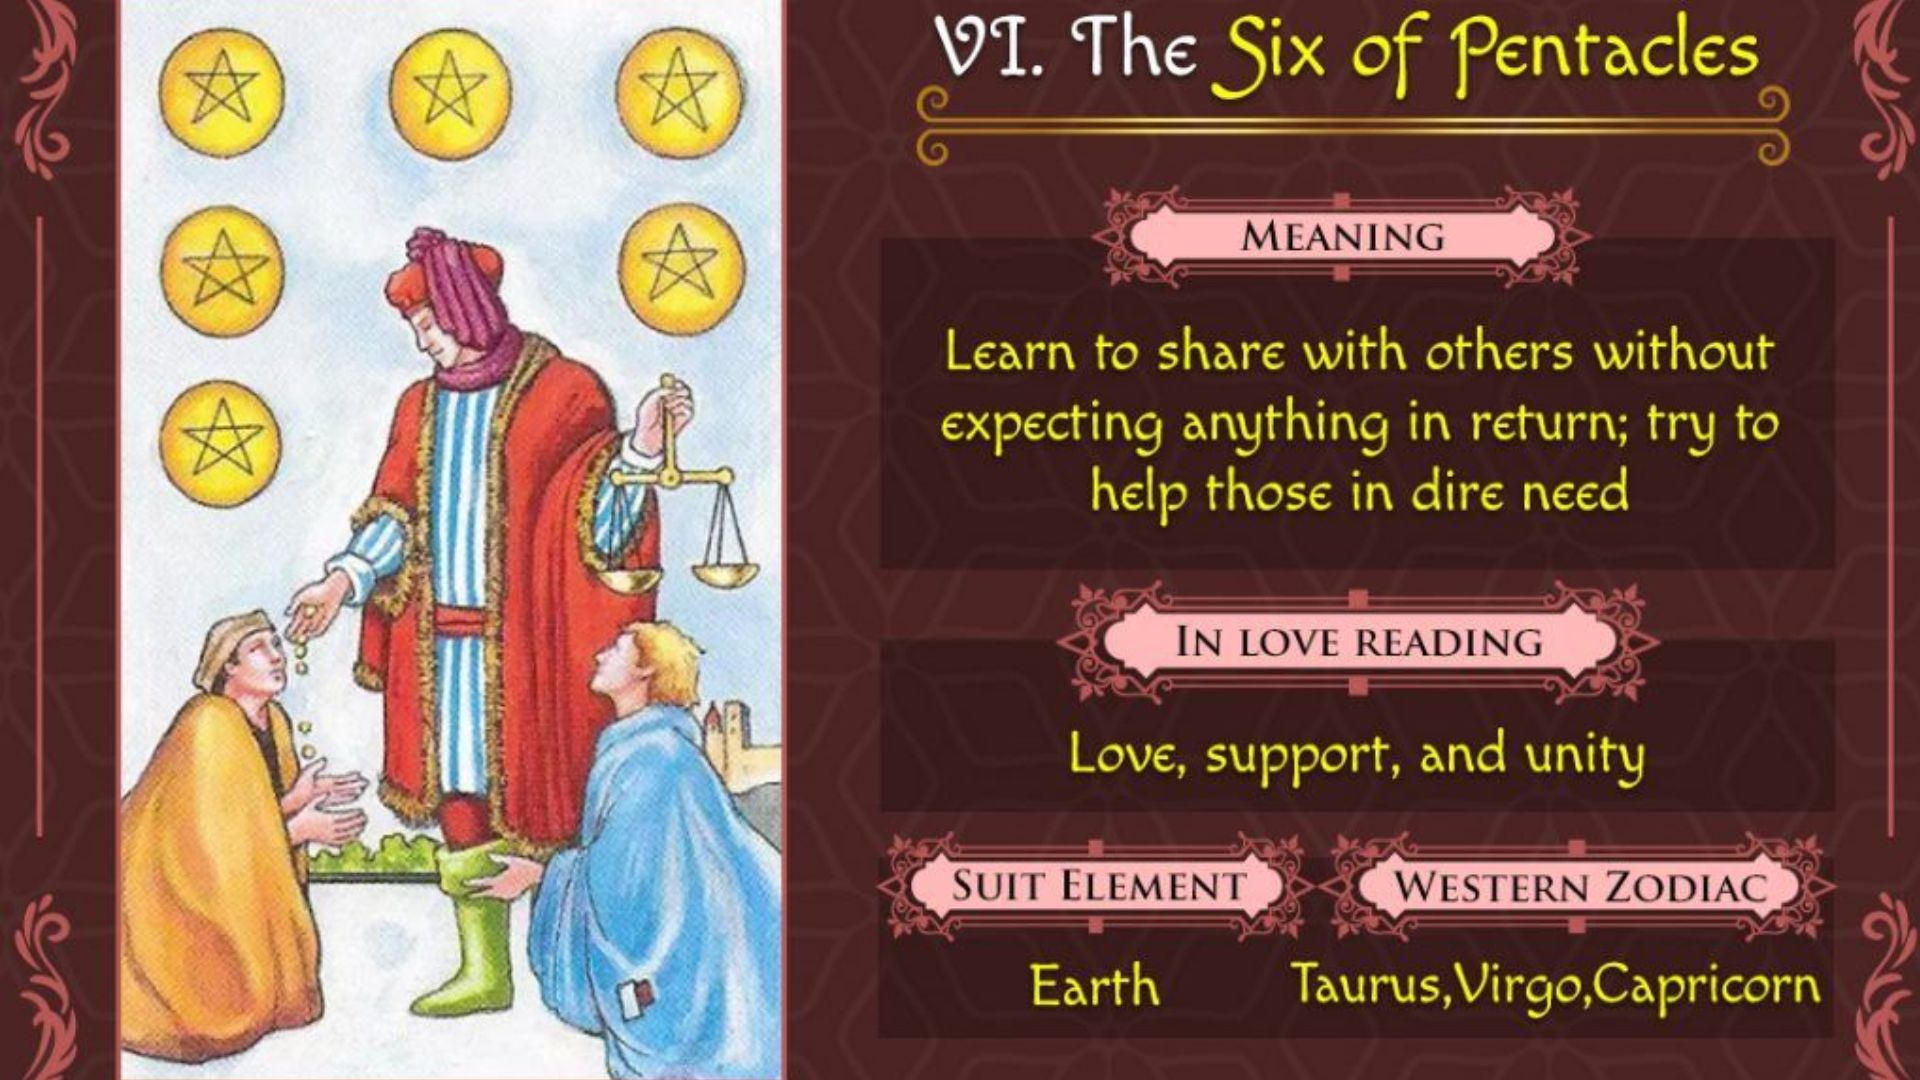 6 Of Pentacles - Tarot Card Represents Gifts, Kindness And Generosity